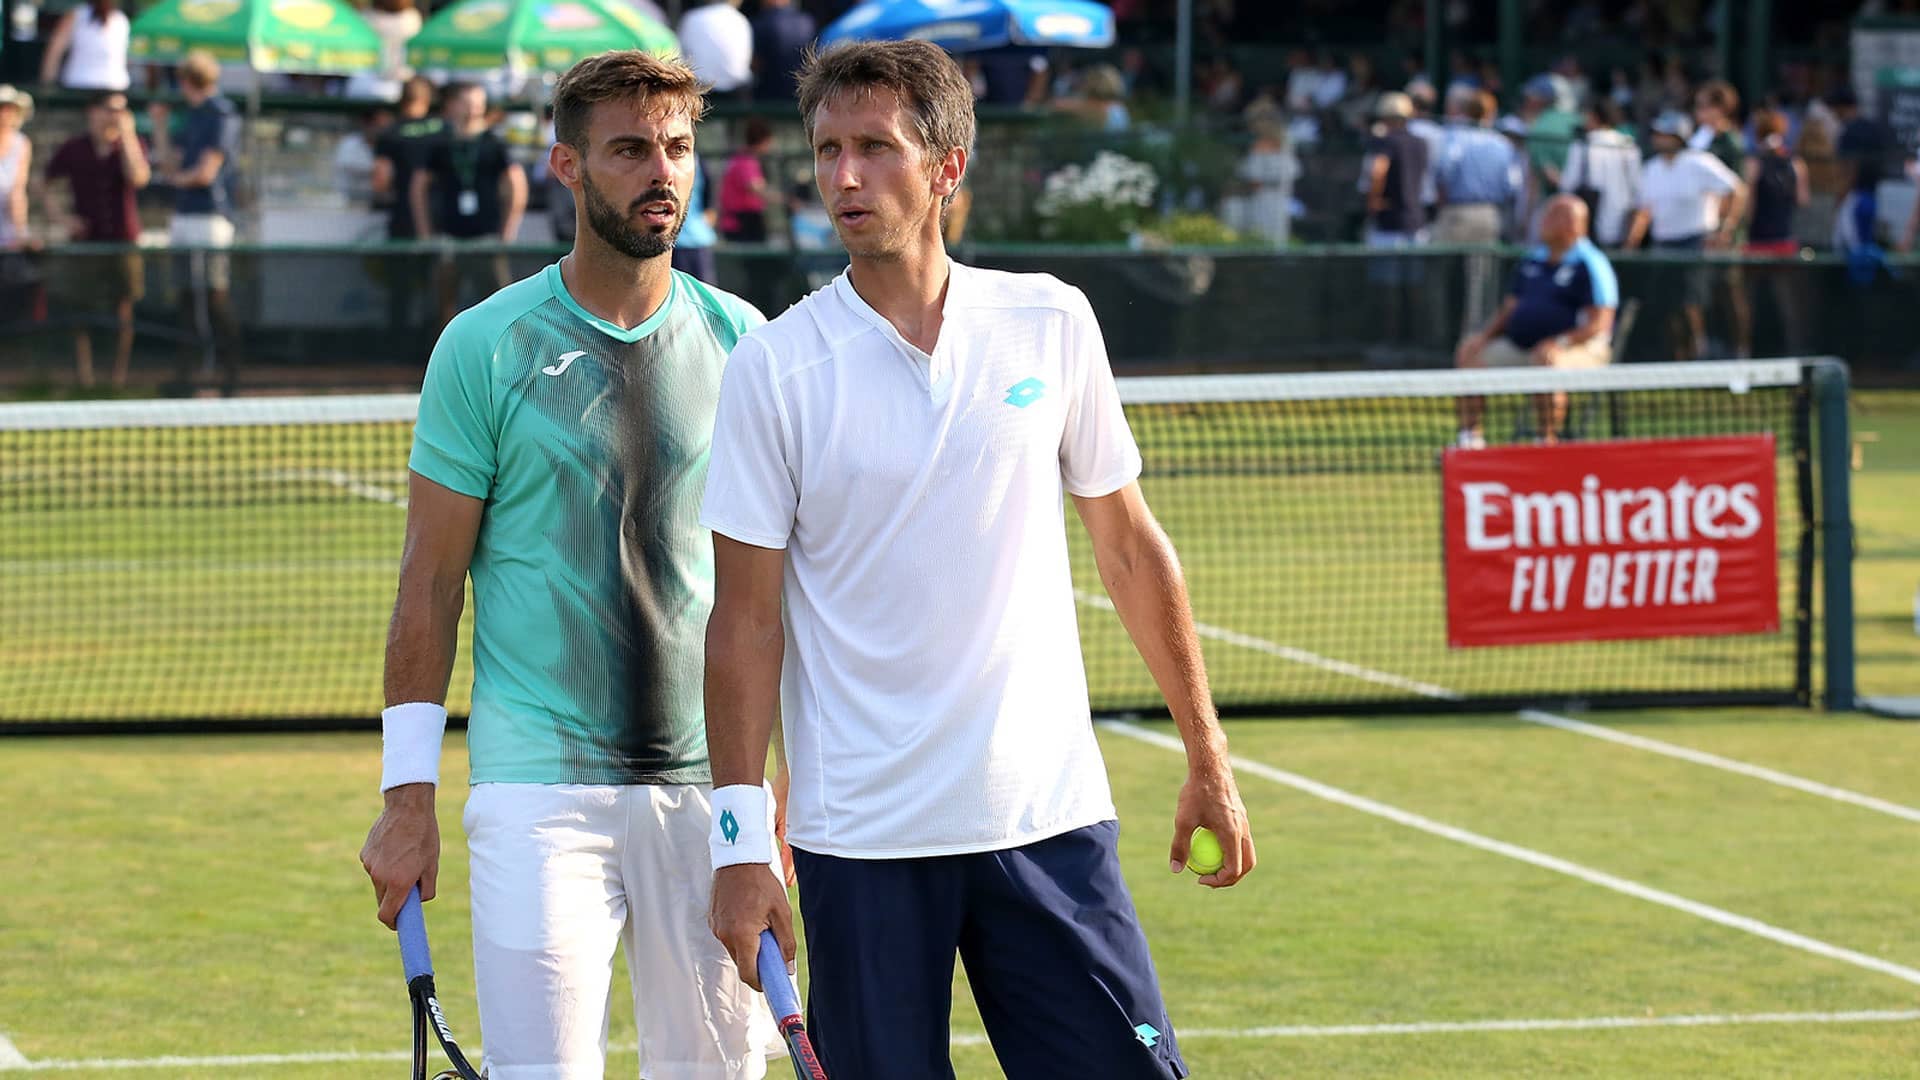 Marcel Granollers and Sergiy Stakhovsky in Newport 2019